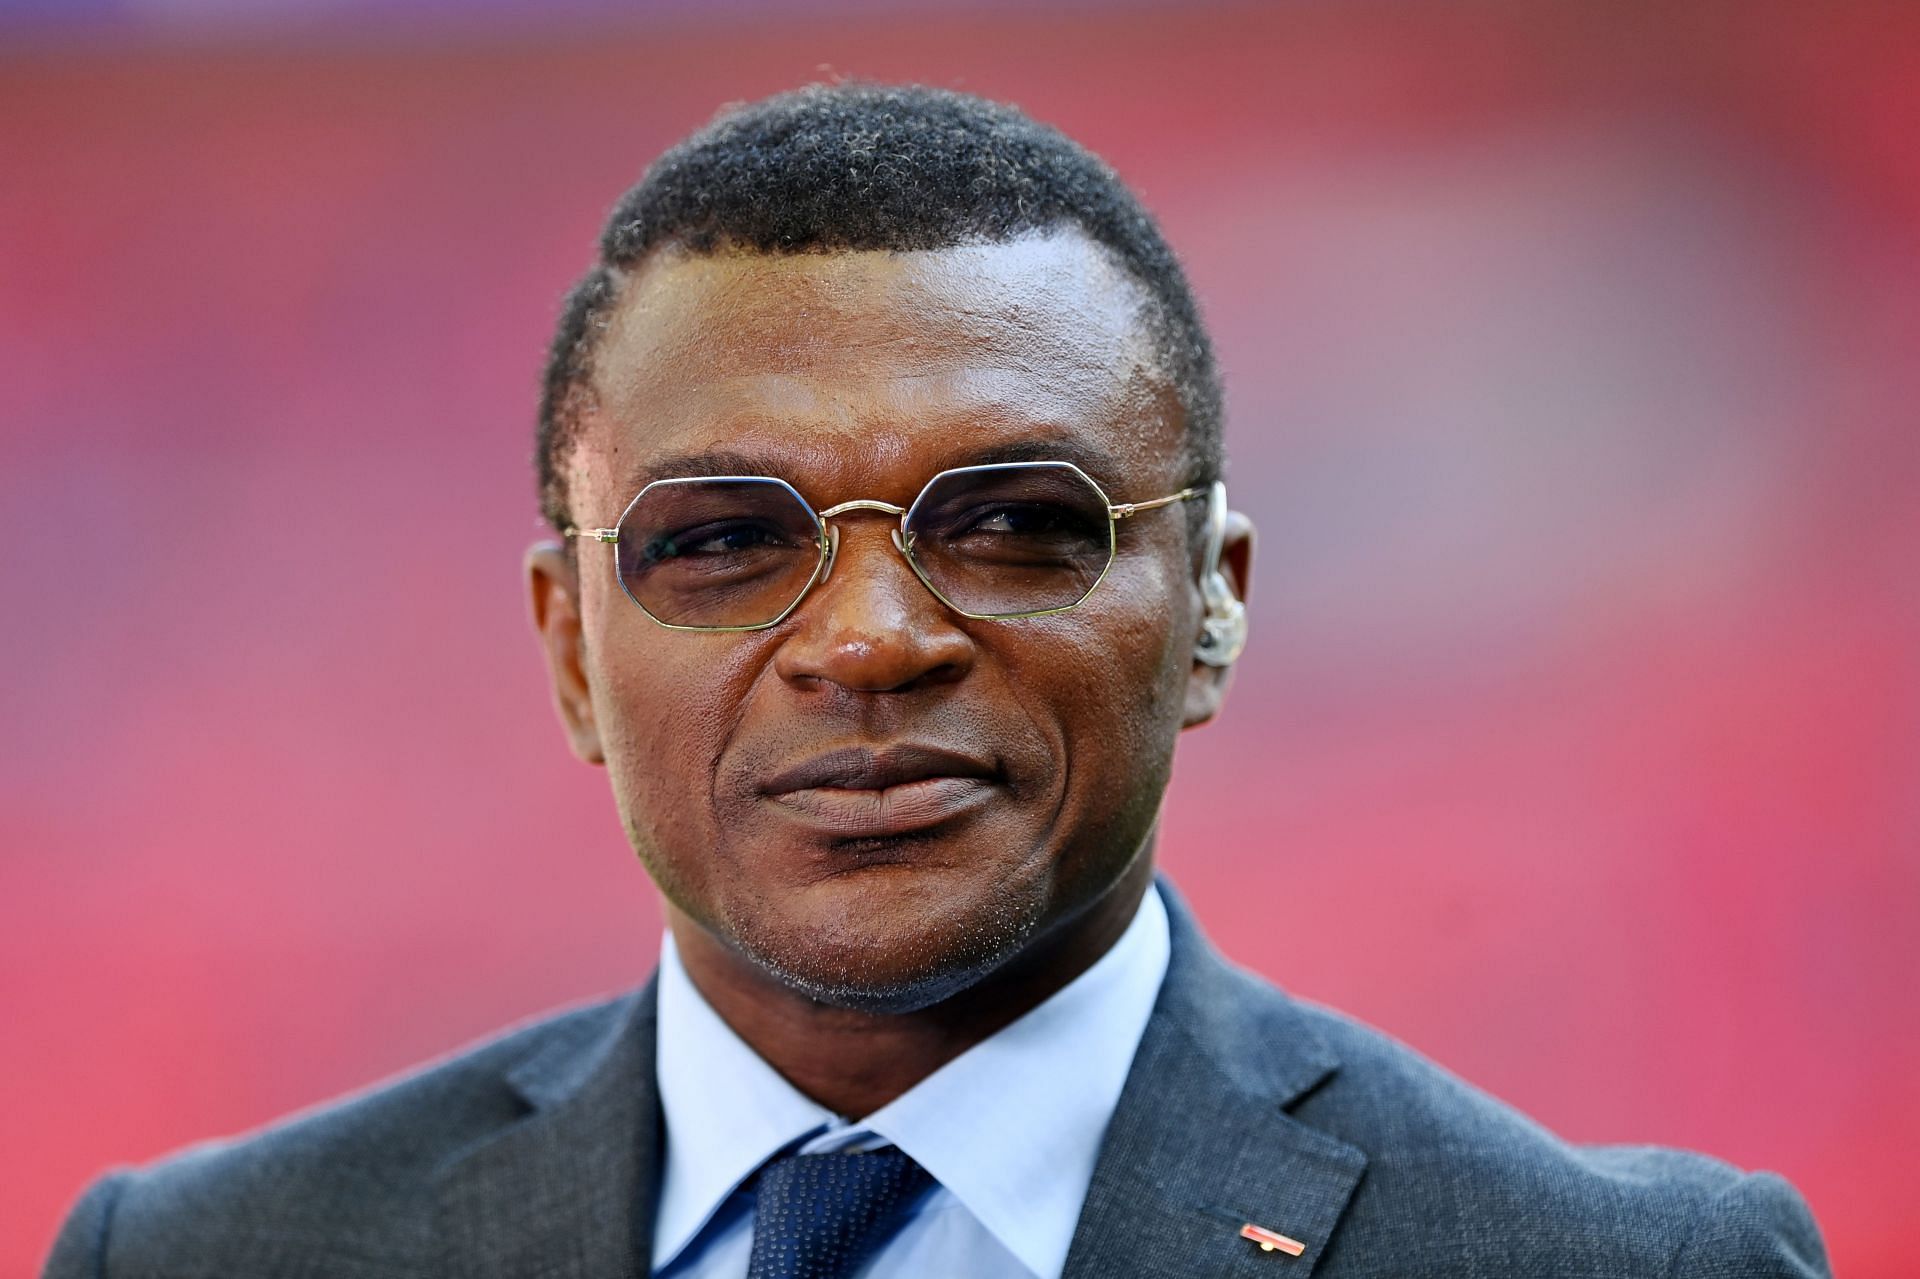 Marcel Desailly has spoken about his former club.